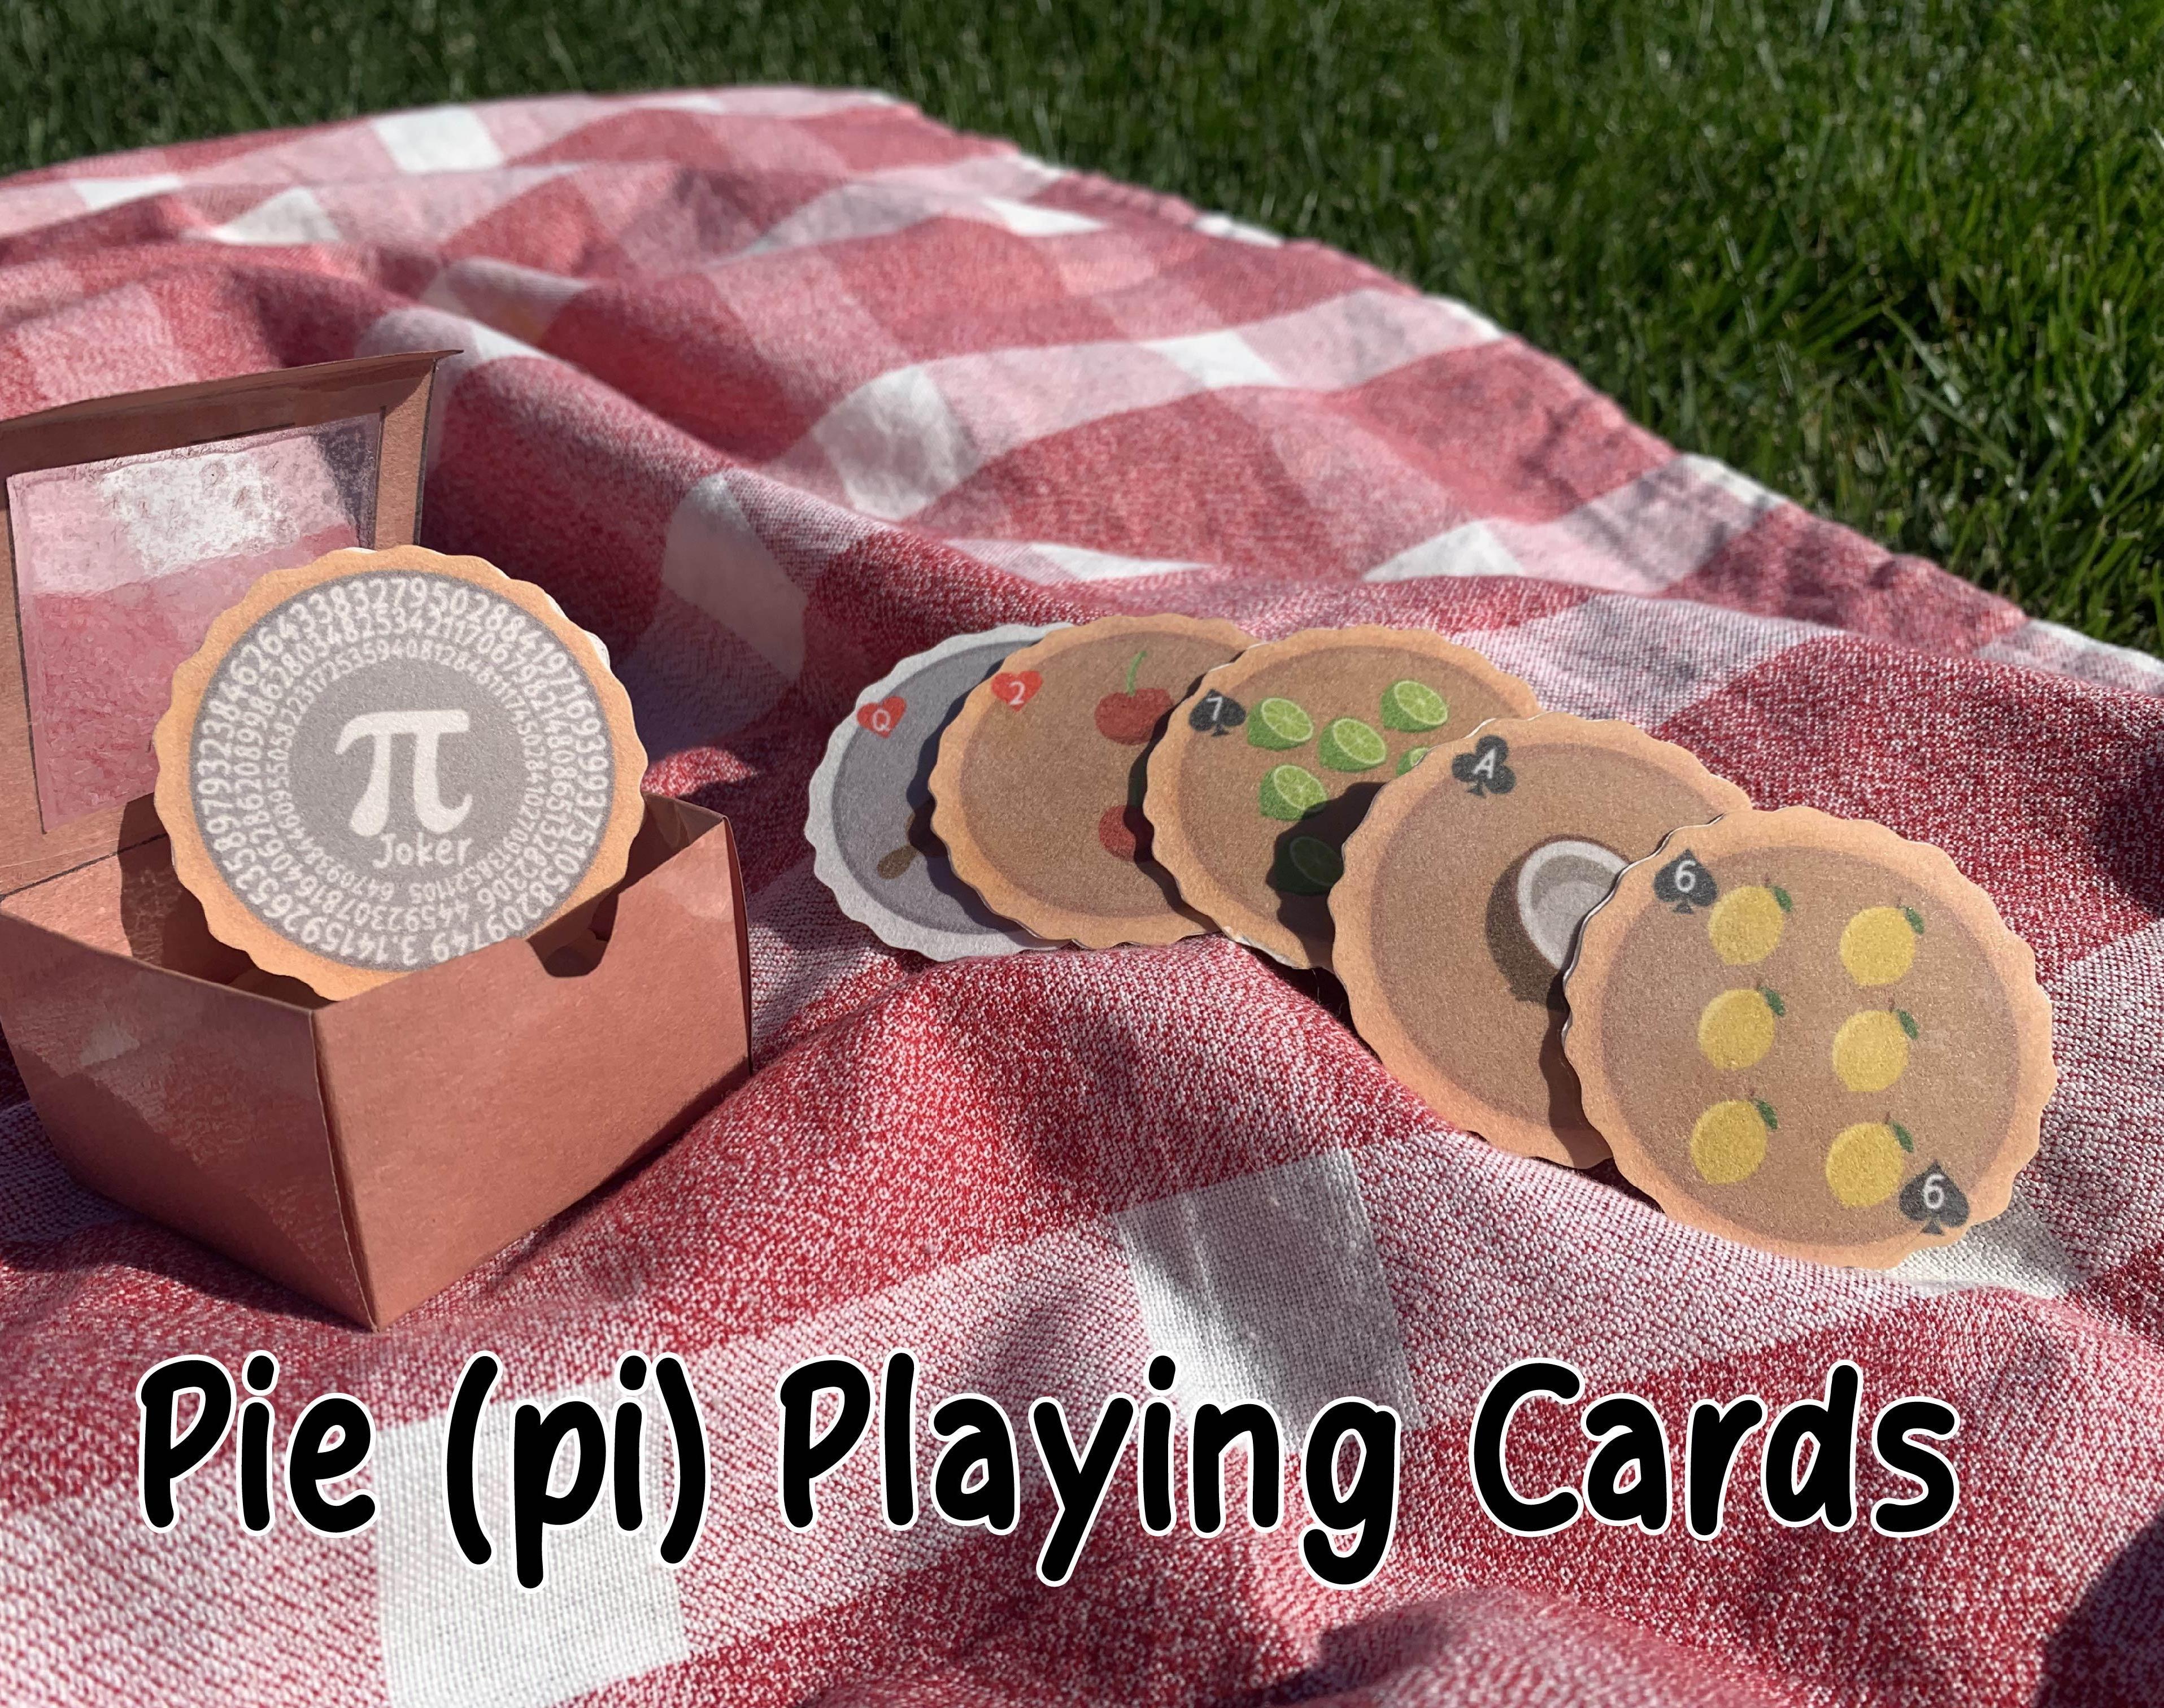 Pie (pi) Playing Cards